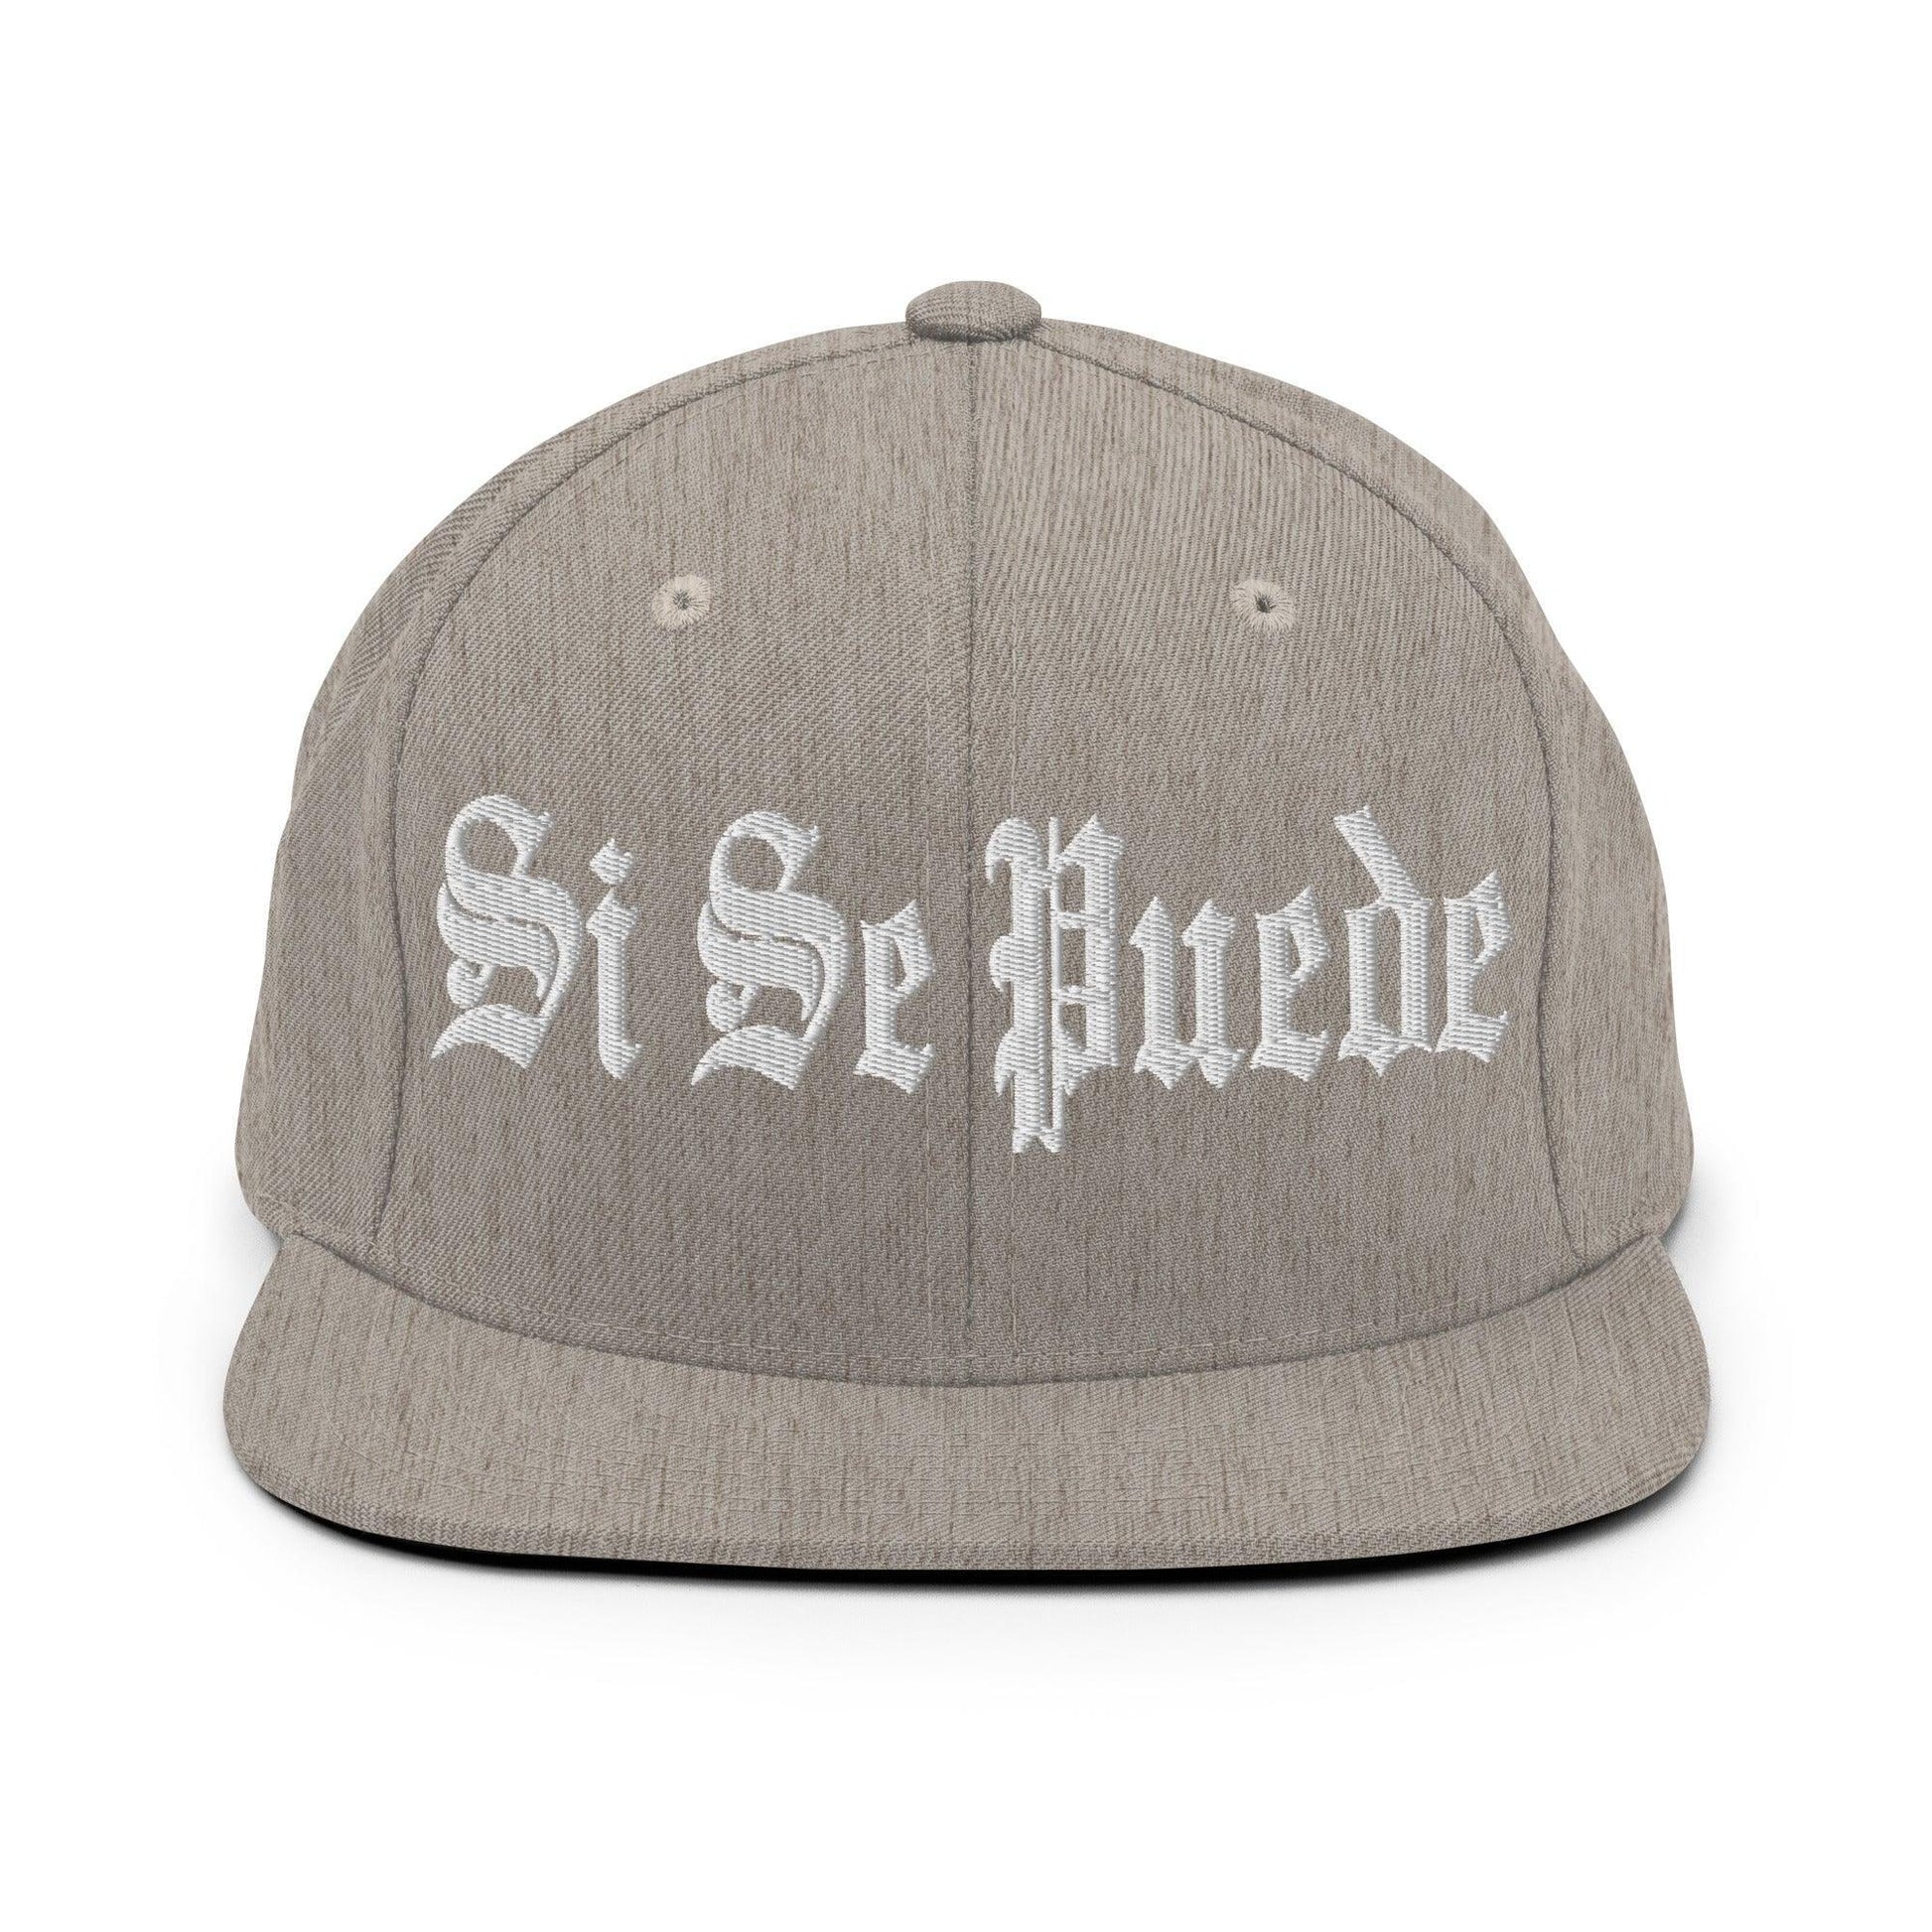 Si Se Puede Old English Snapback Hat Heather Grey